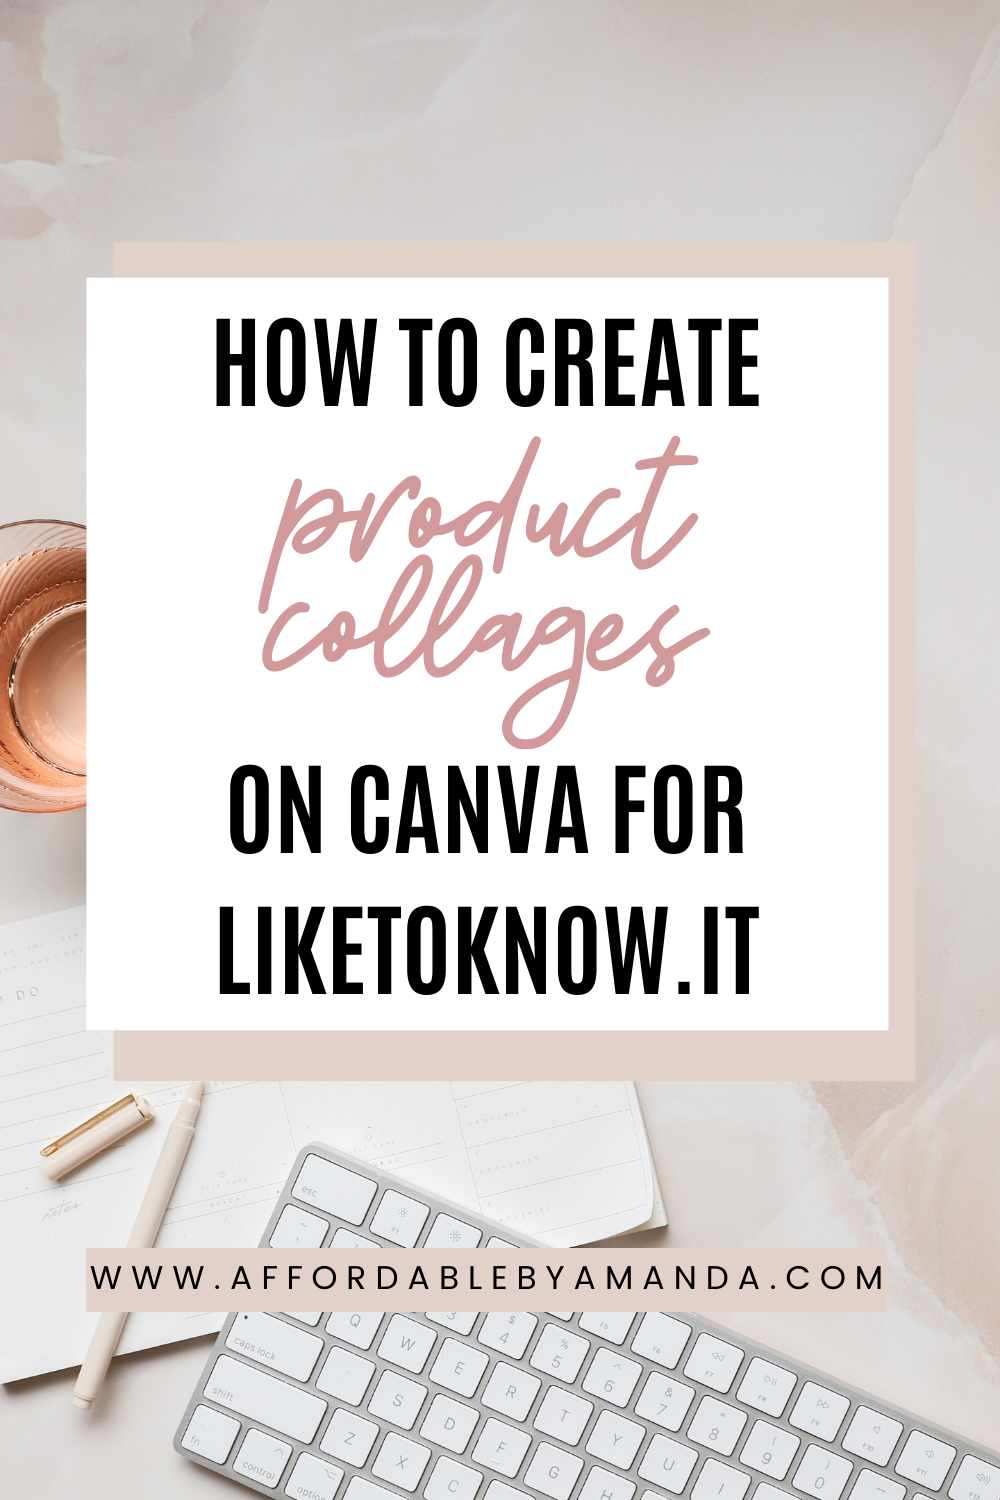 How to Make a Shoppable Collage | How to Make a Product Collage | How to Create Collages for Like To Know It | Product Collage Canva